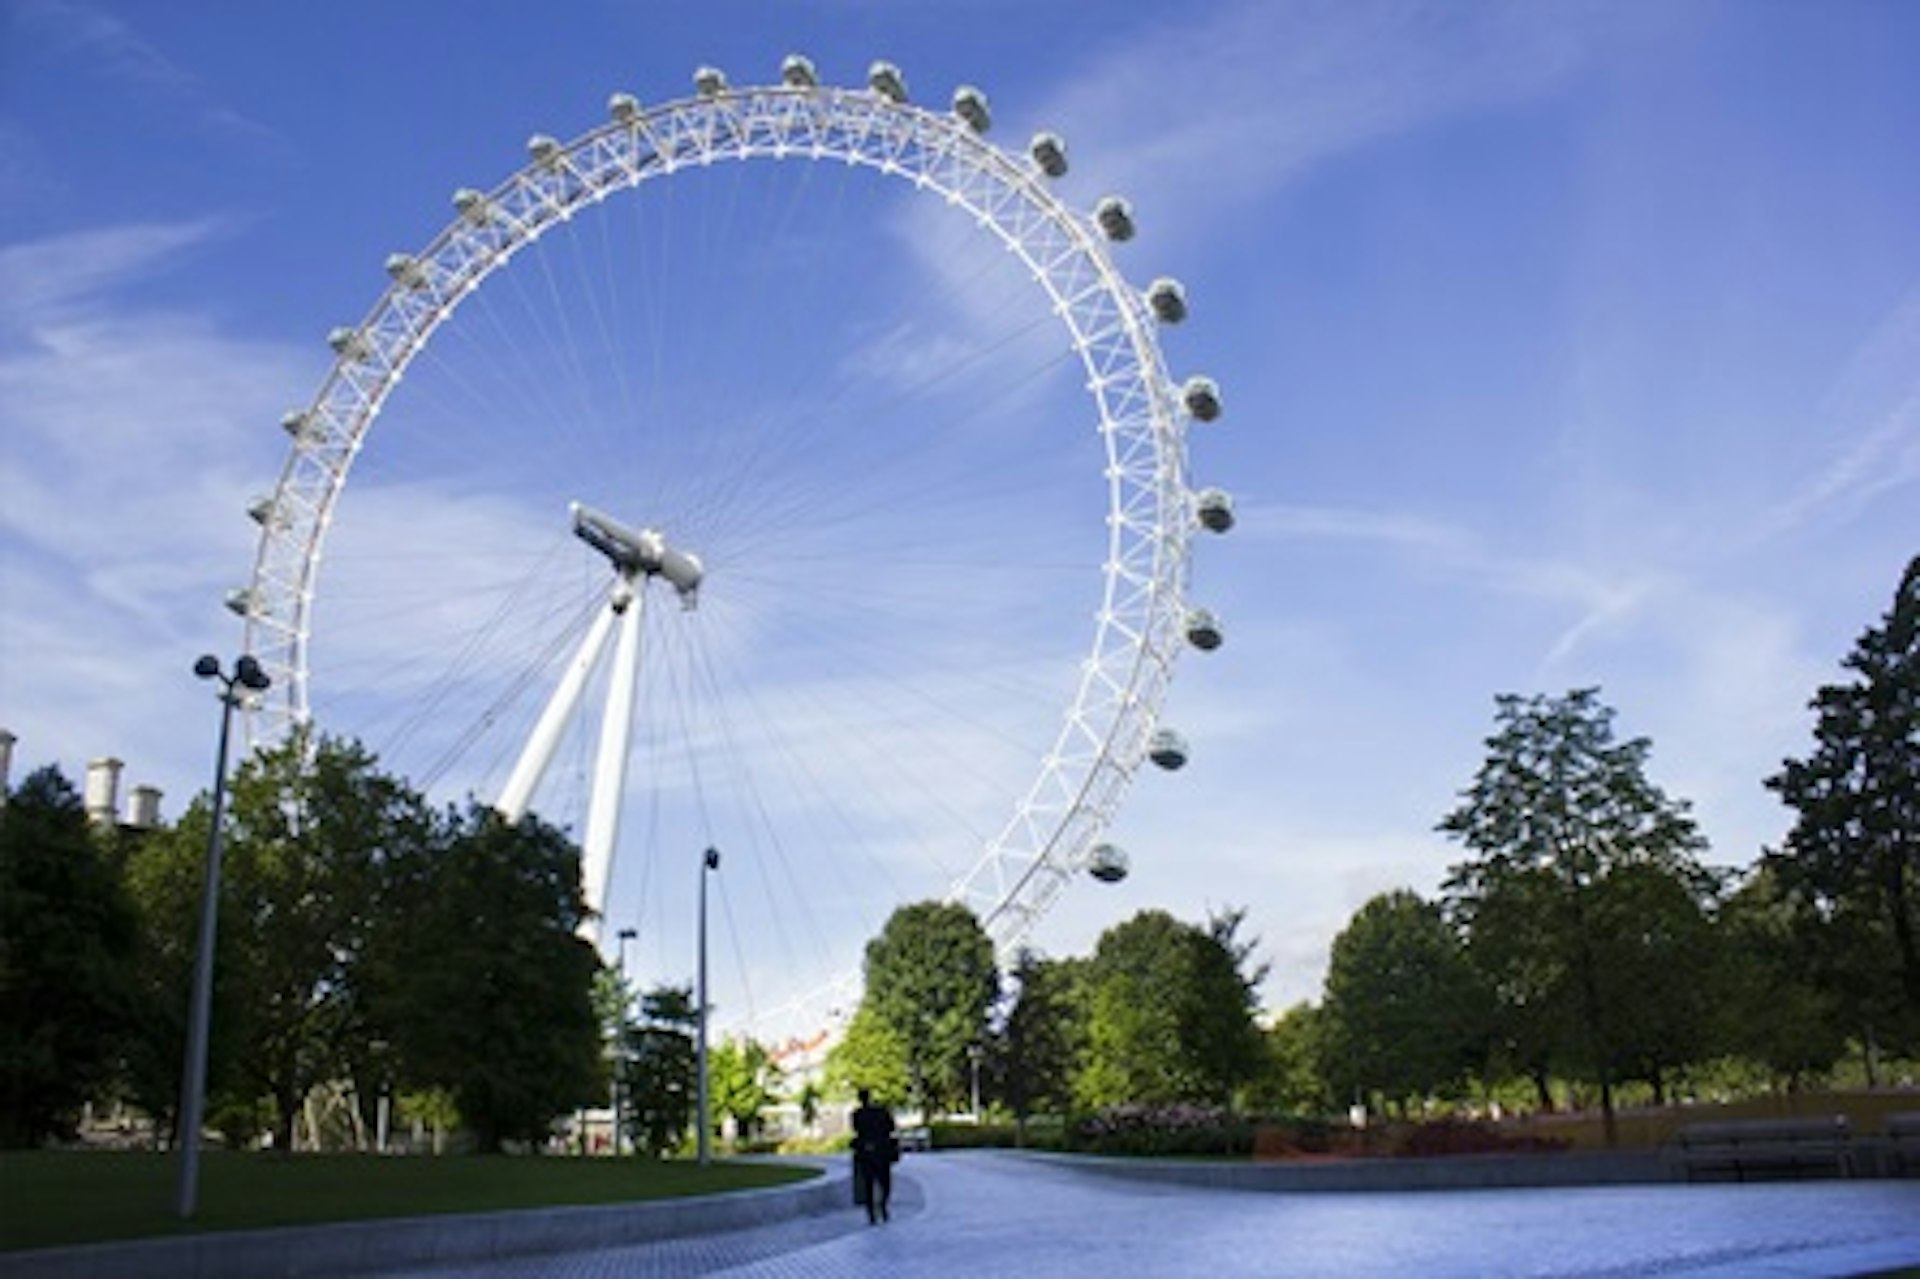 Family Visit to the London Eye for Two Adults and One Child 2